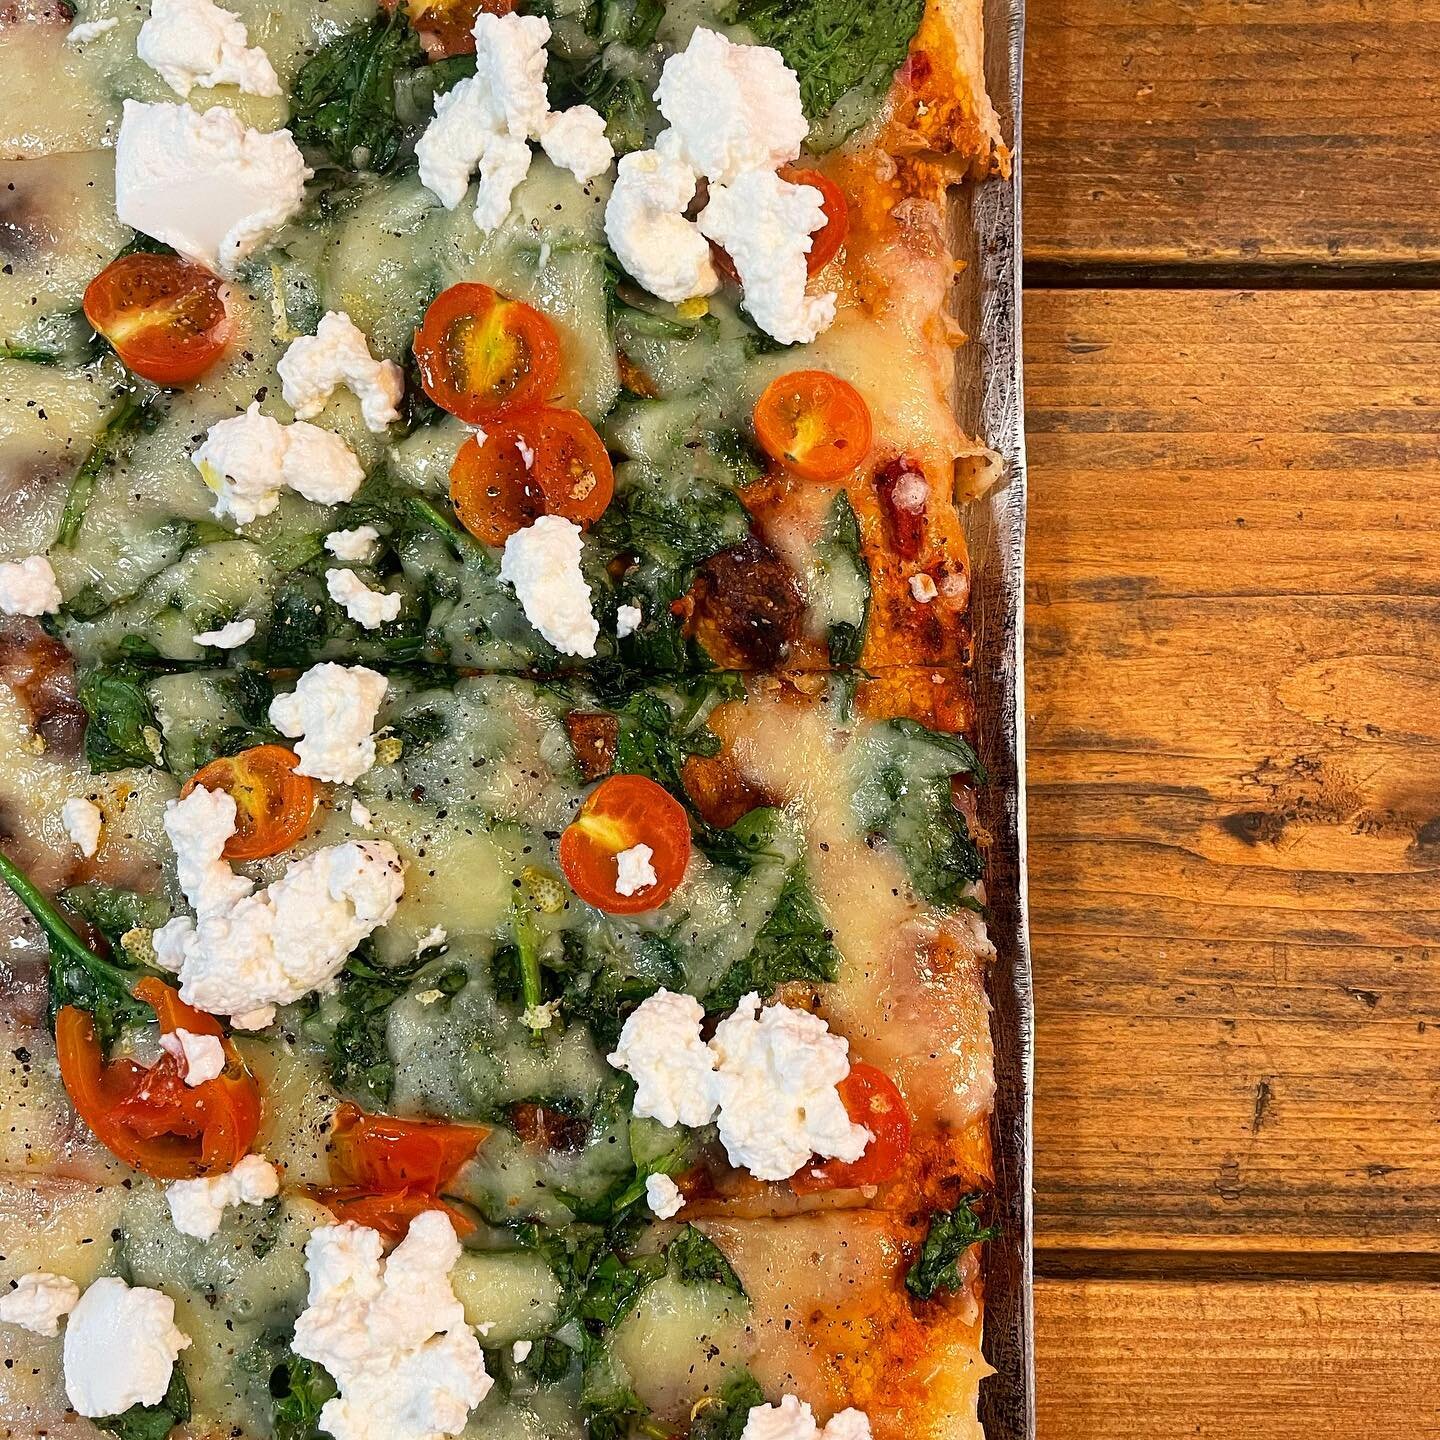 Have you been eating your greens? A slice a day keeps the doctor away, and POPEYE is at hand to help you out💪

Spinach
Cherry tomatoes 
Ricotta
Lemon zest
Black pepper

#theblock #theblockyork #york #visityork #yorkfood #pizza #indieyork #yorktouris